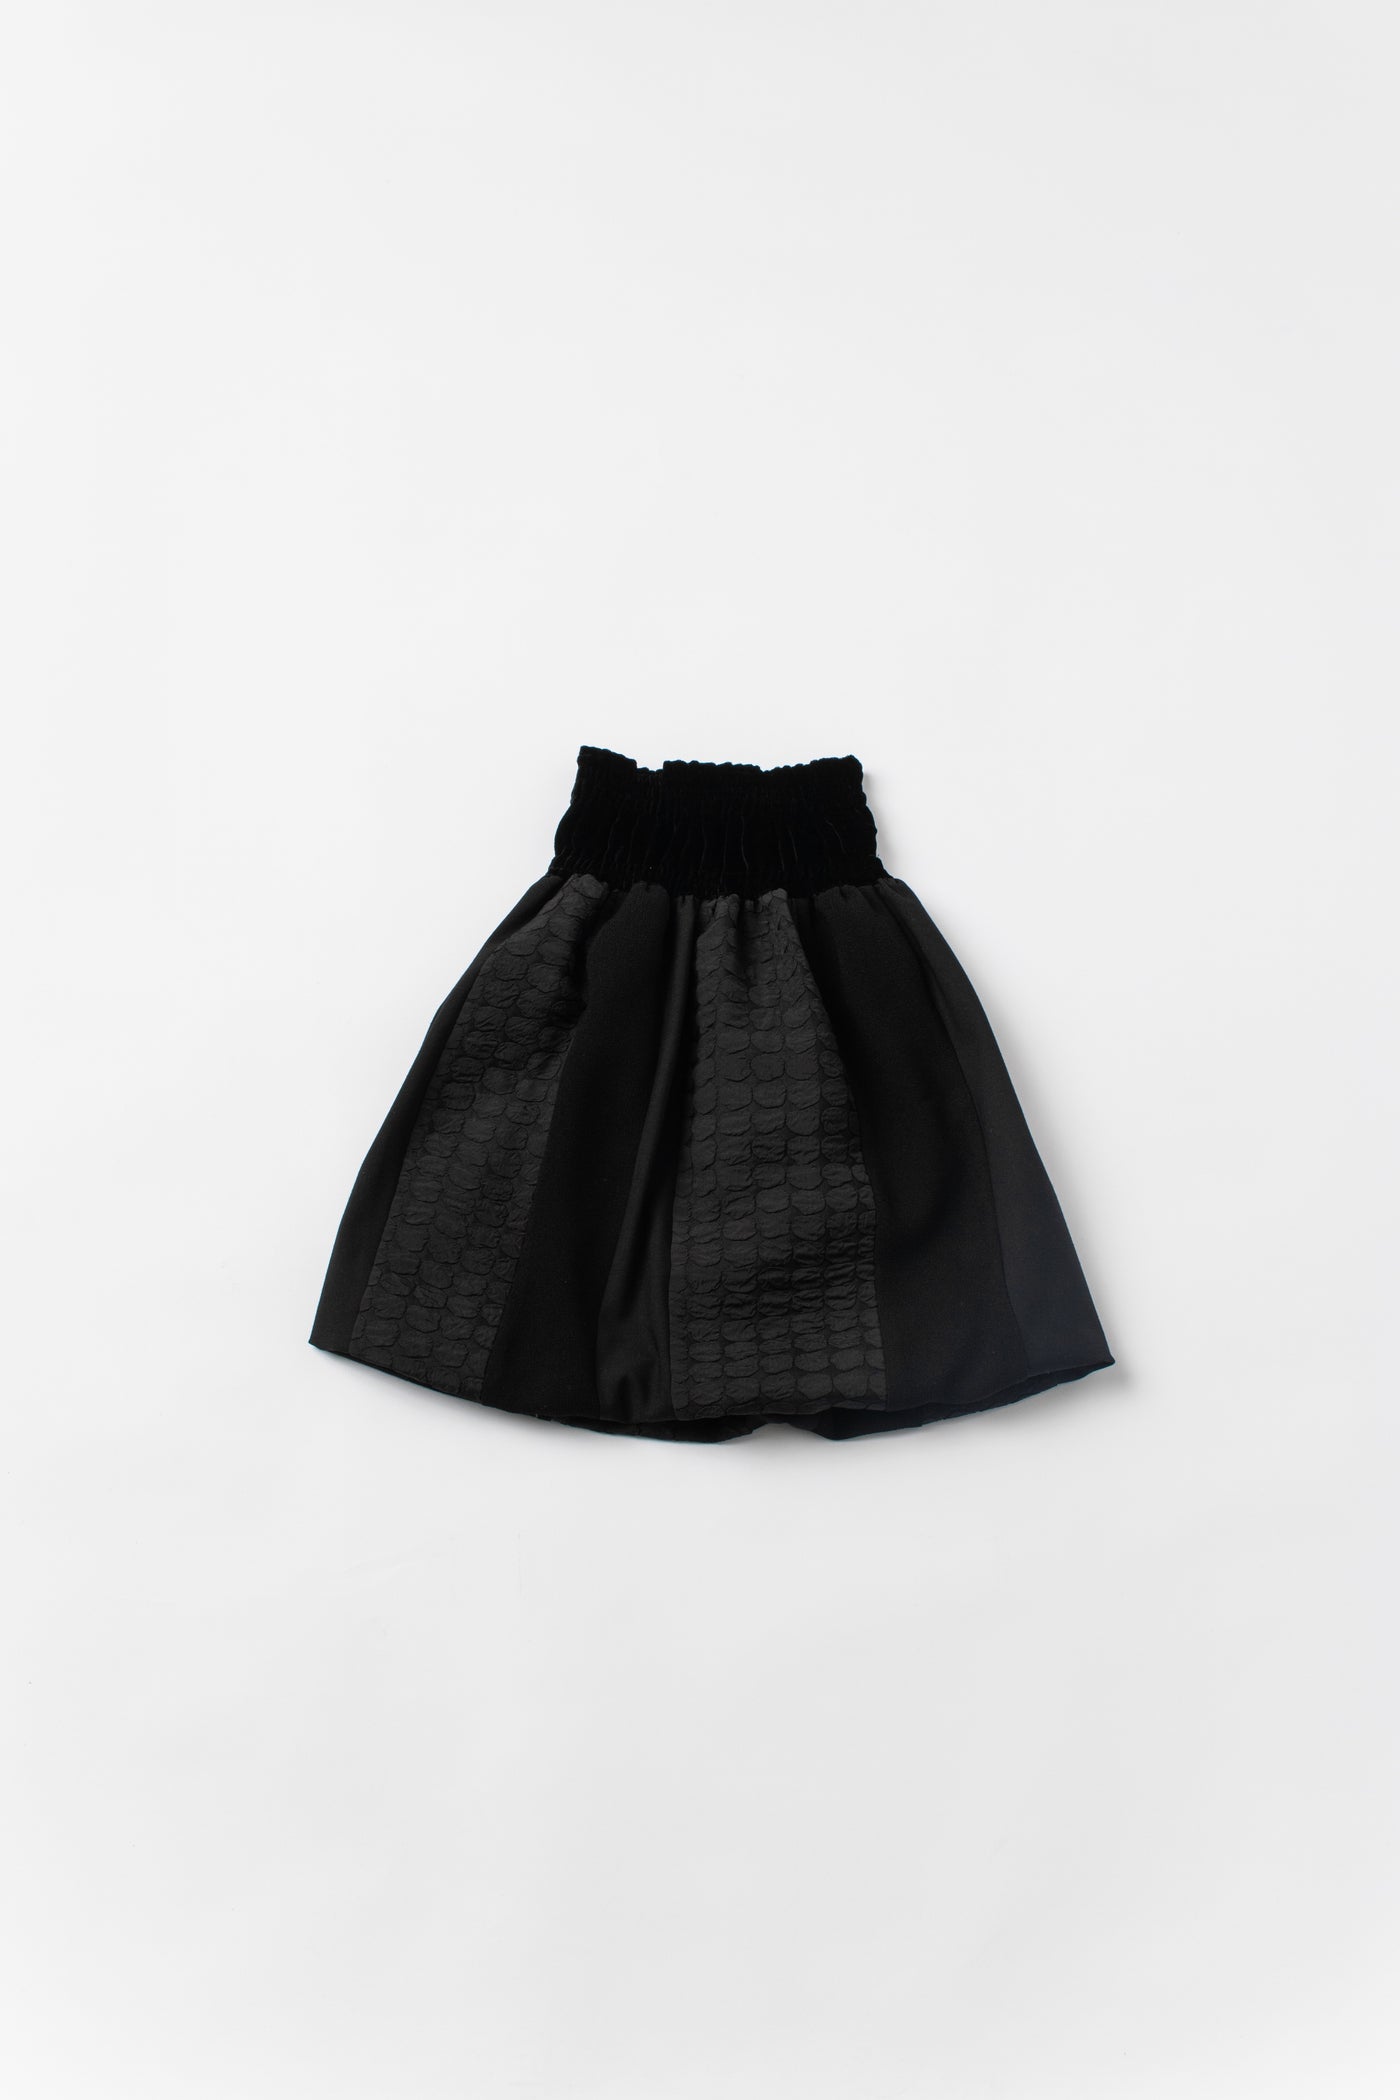 CINDY CHASE SKIRT